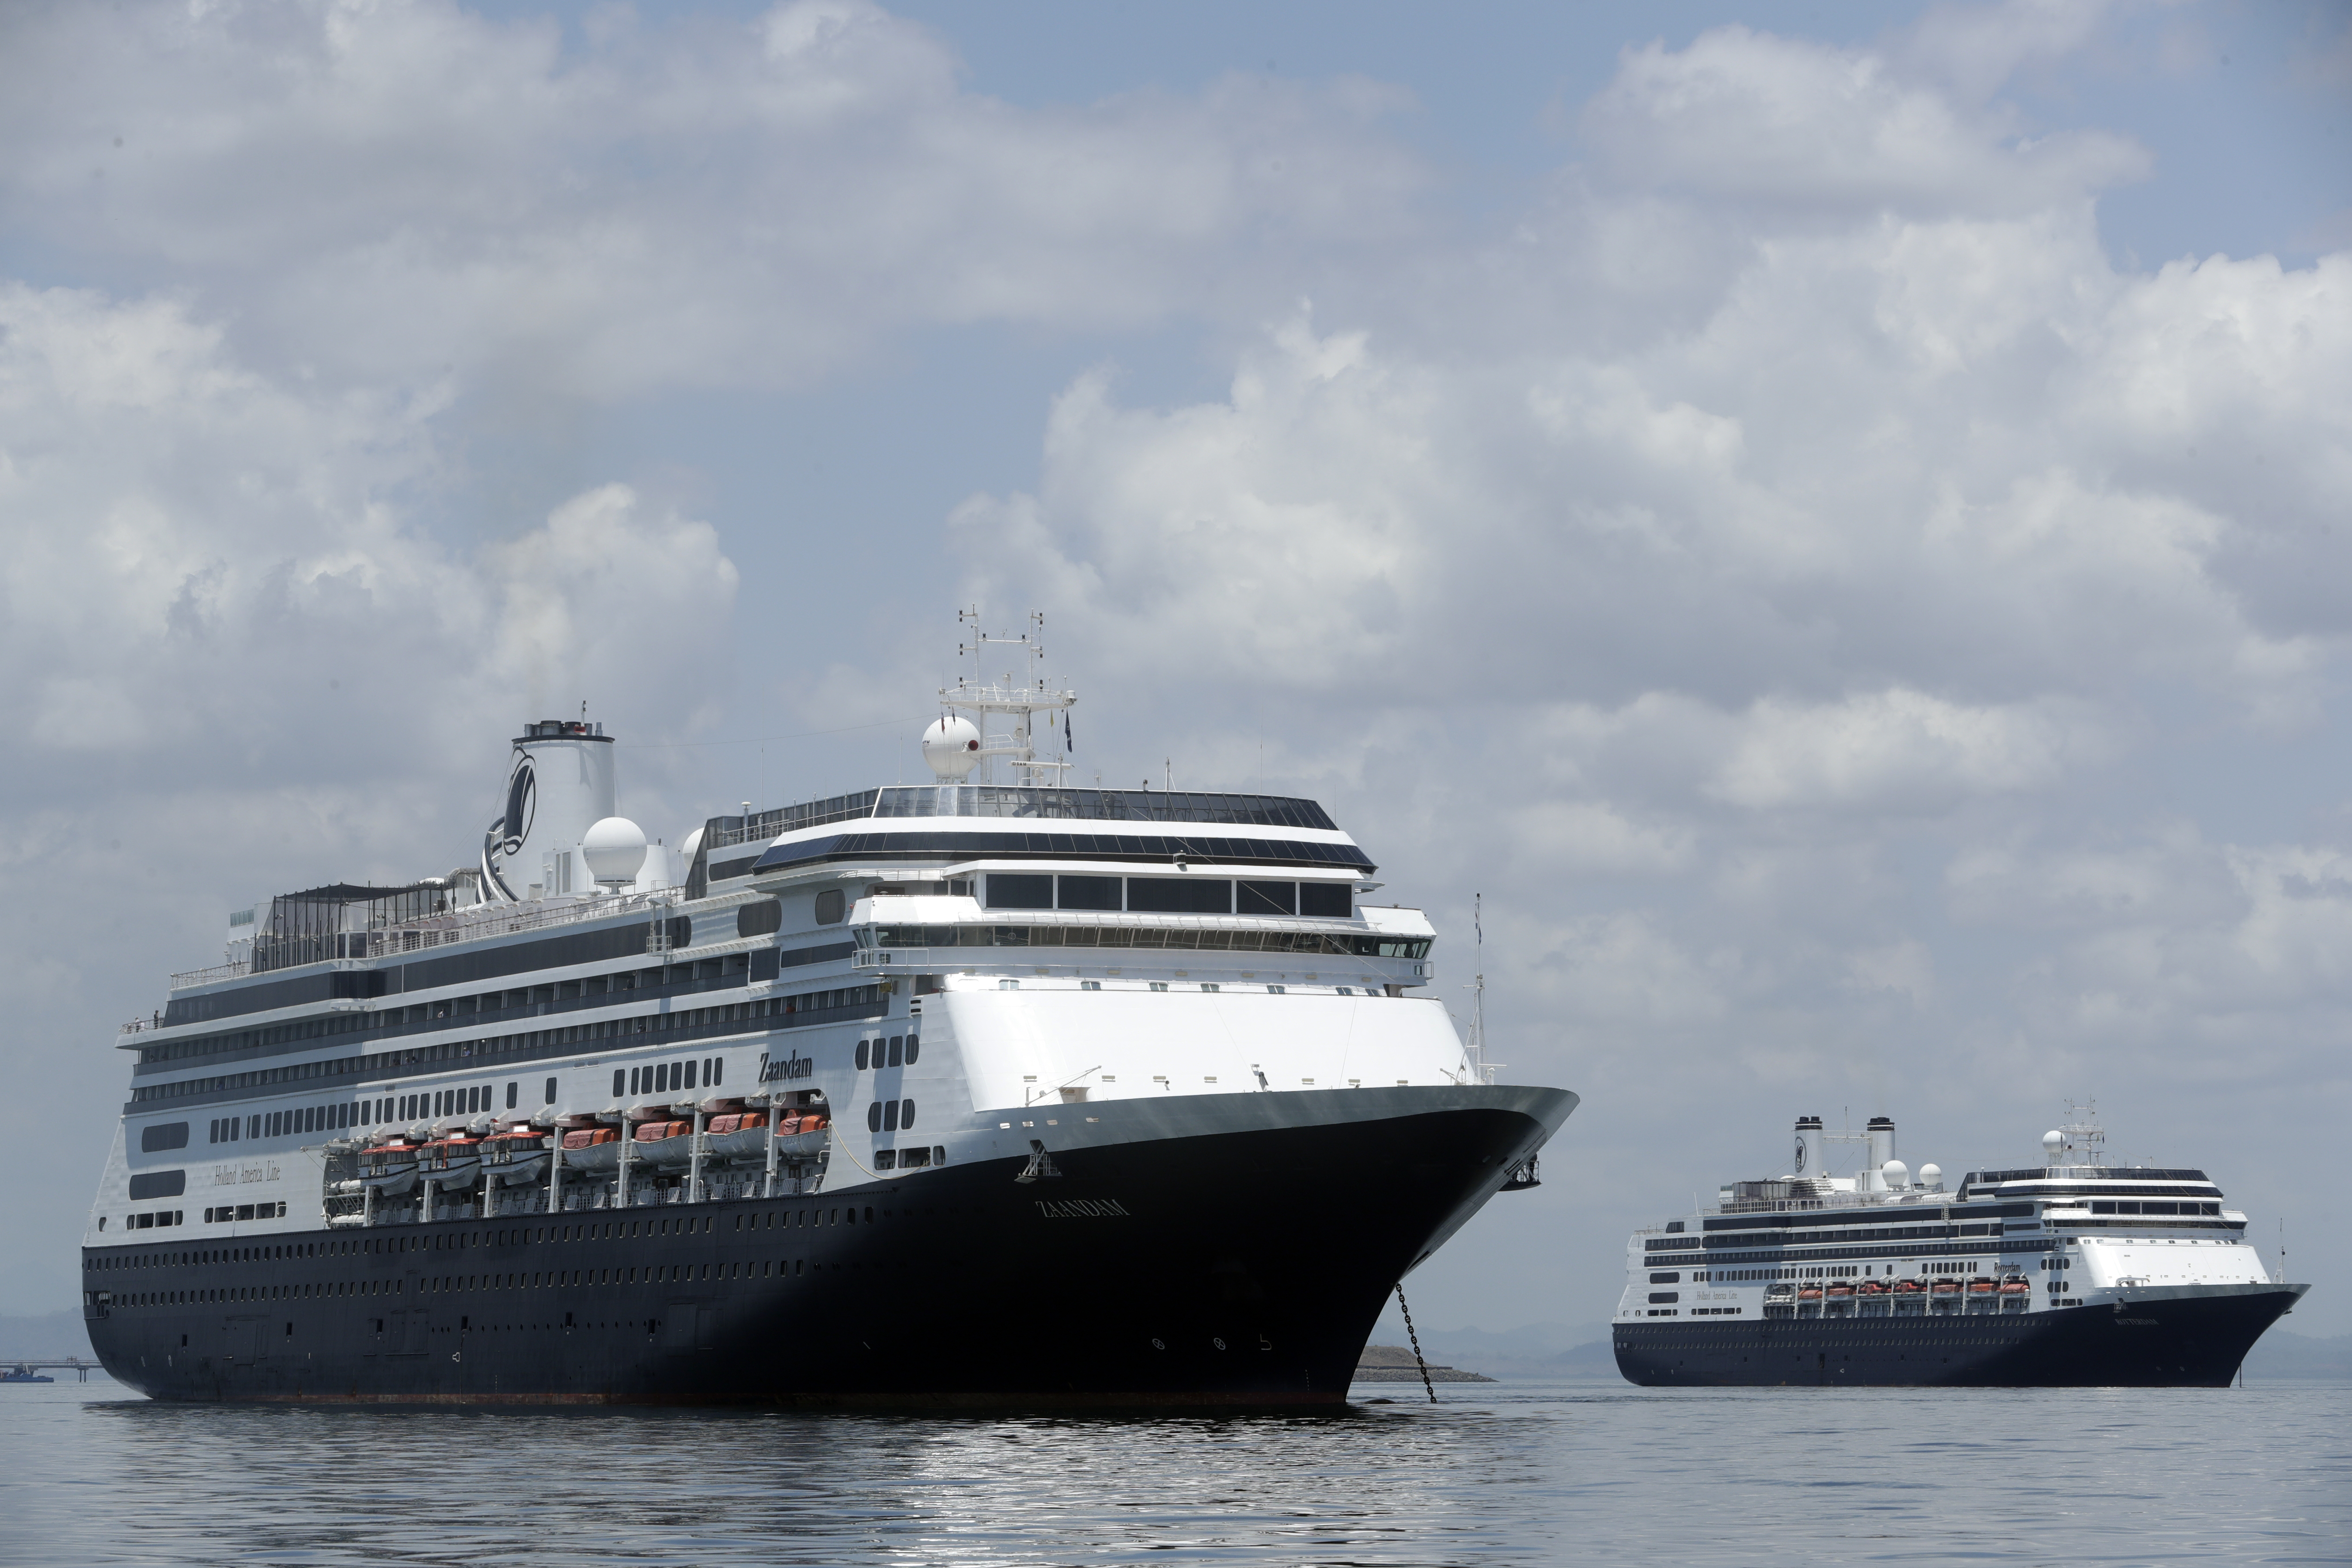 The Zaandam cruise ship, left, carrying some guests with flu-like symptoms, is anchored shortly after it arrived to the bay of Panama City, Friday, March 27, 2020, amid the worldwide spread of the new coronavirus. Health authorities are expected to board the ship to test passengers and decide whether it can cross the Panama Canal.